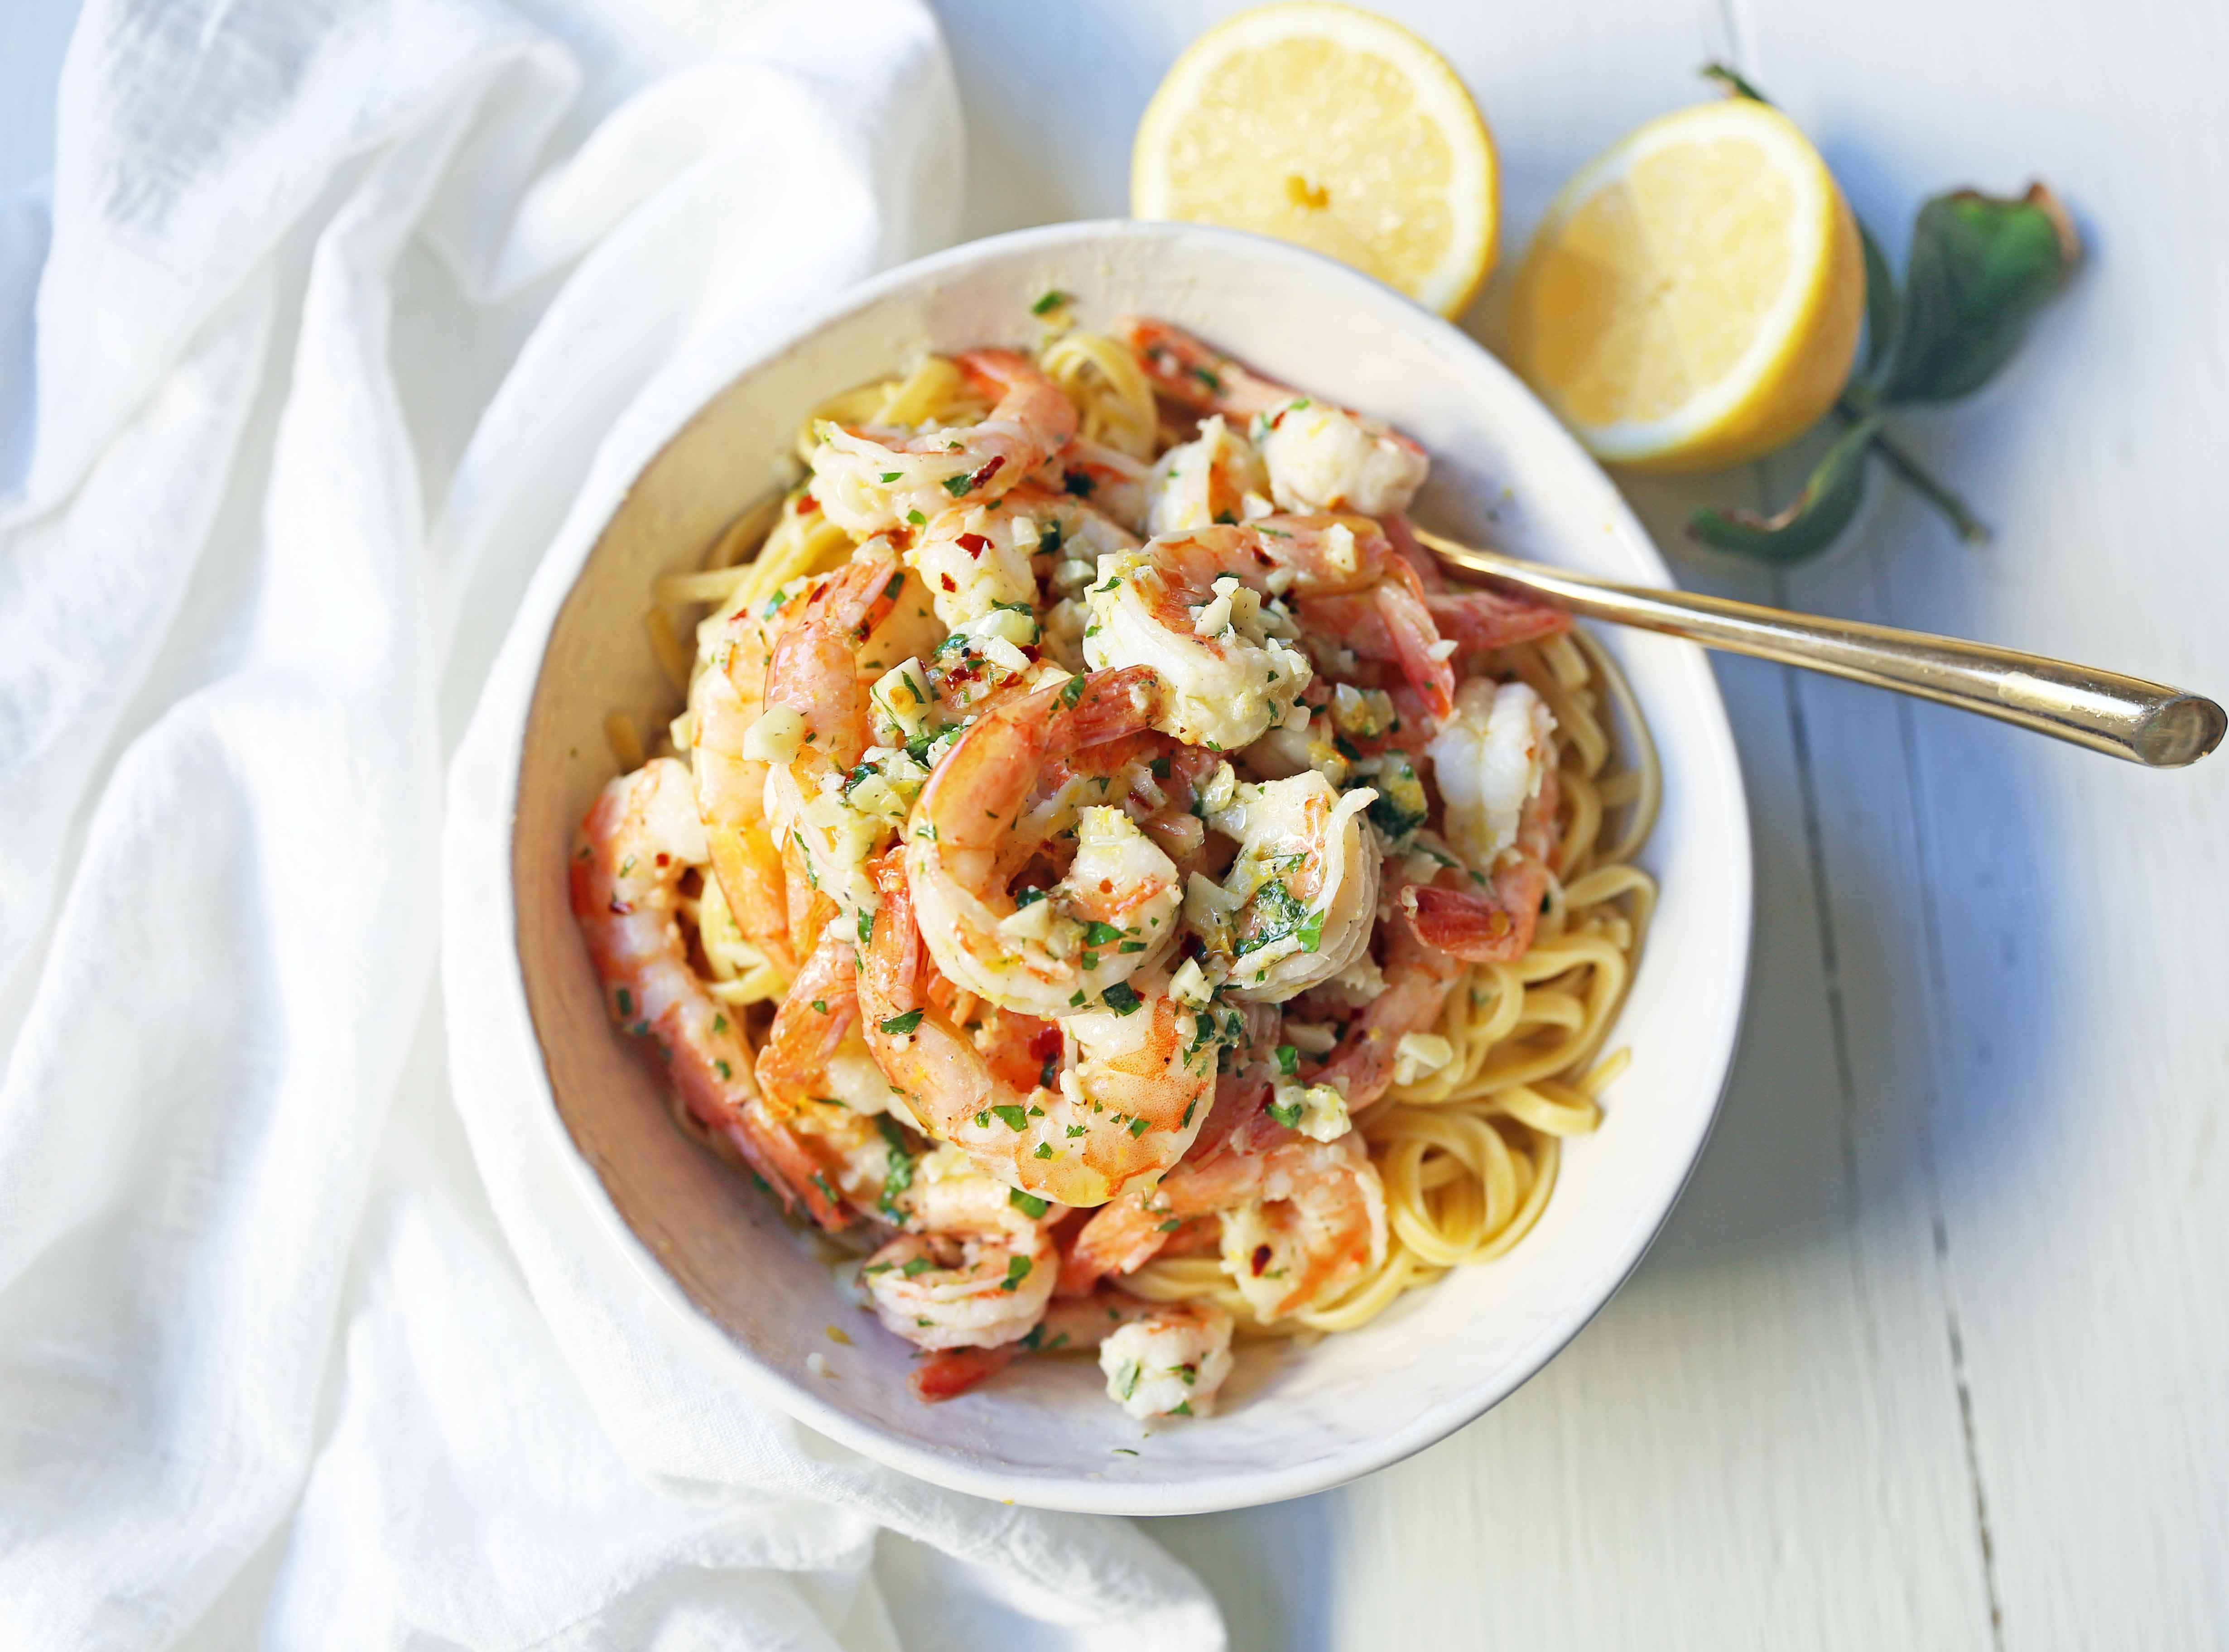 Shrimp Scampi Linguine. Shrimp sauteed in a lemon garlic butter sauce tossed with linguine pasta and made in less than 20 minutes. www.modernhoney.com #shrimp #shrimpscampi #shrimpscampilinguine #pasta #valentinesday